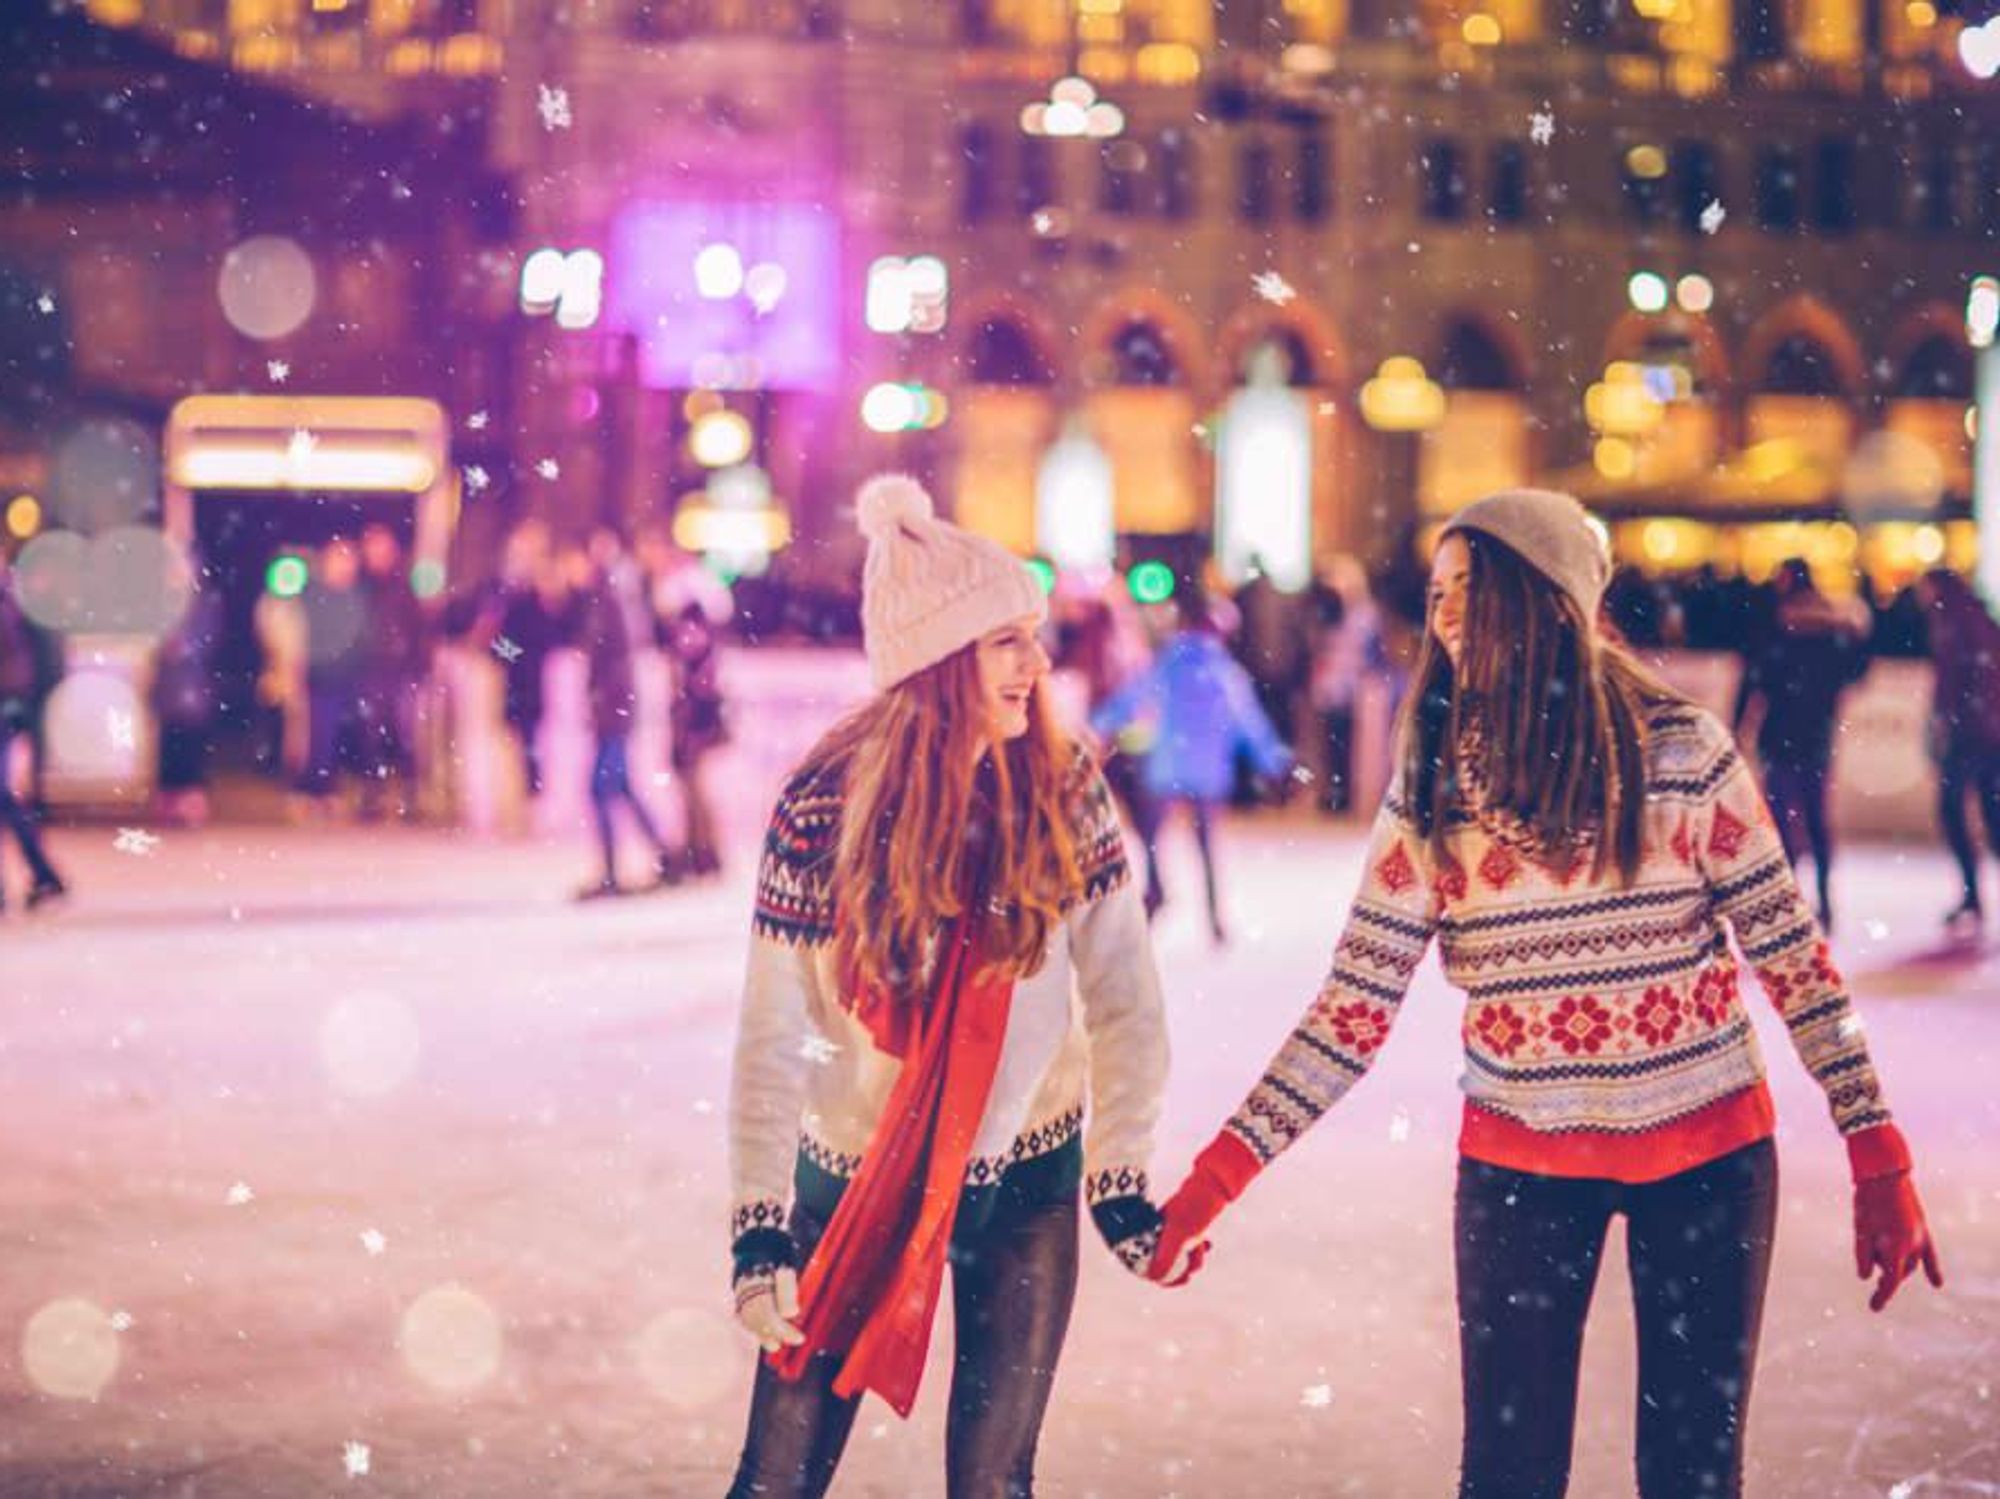 Two young women ice skating